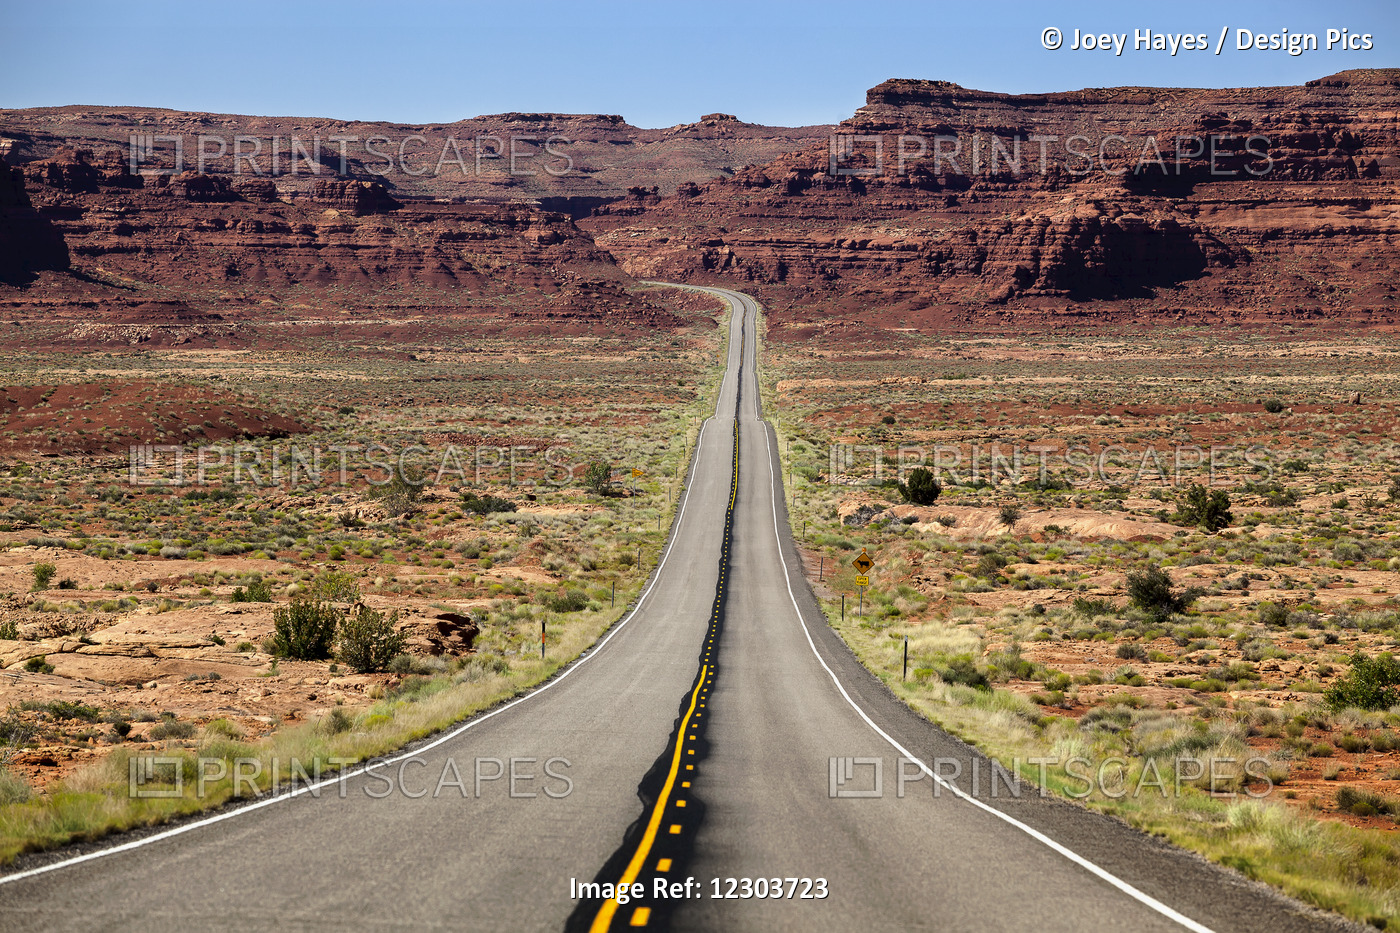 Utah Highway Stretching Into The Distance With Rock Cliffs And Blue Skies In ...